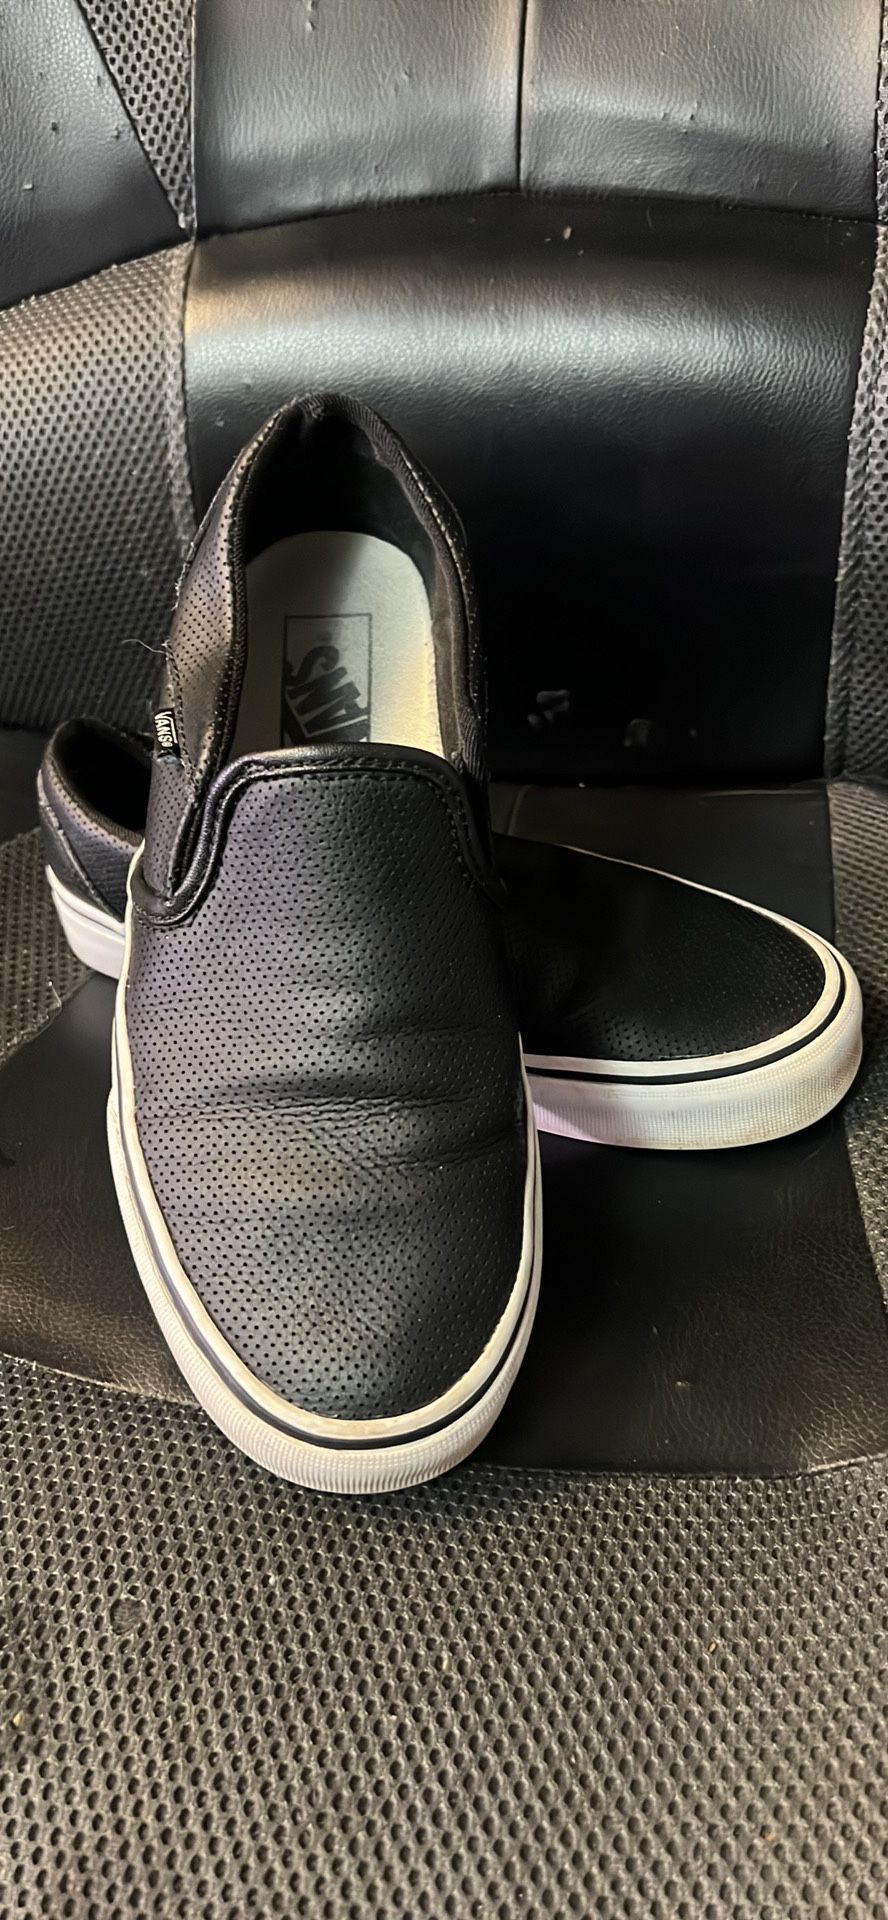 Vans Leather perforated, slip on’s women’s size 8